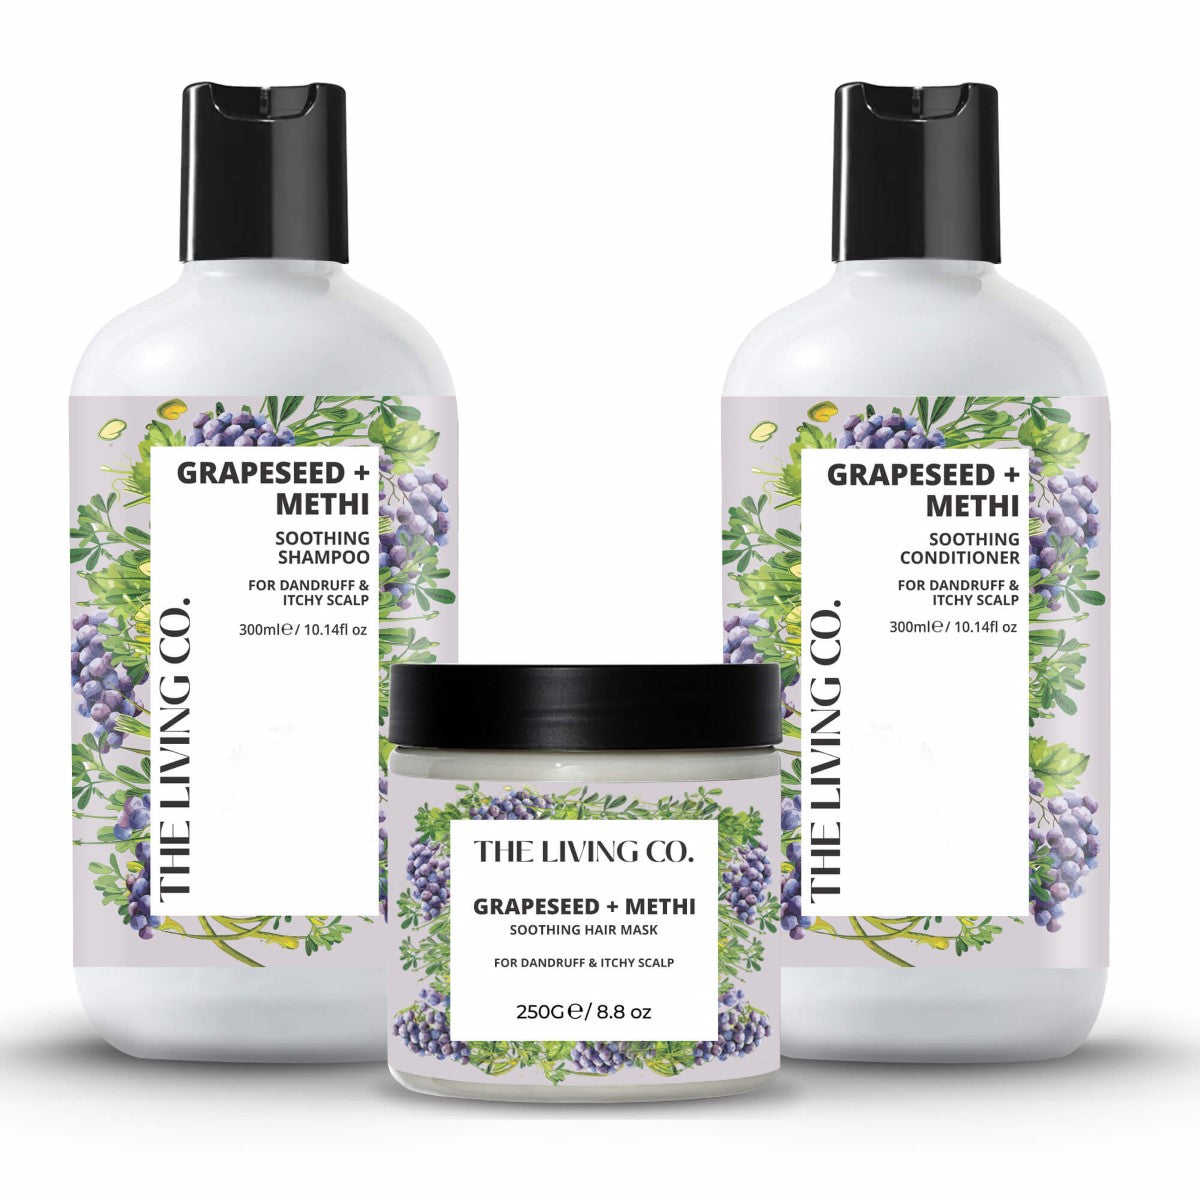 Soothing Hair Care Kit With Grapeseed + Methi